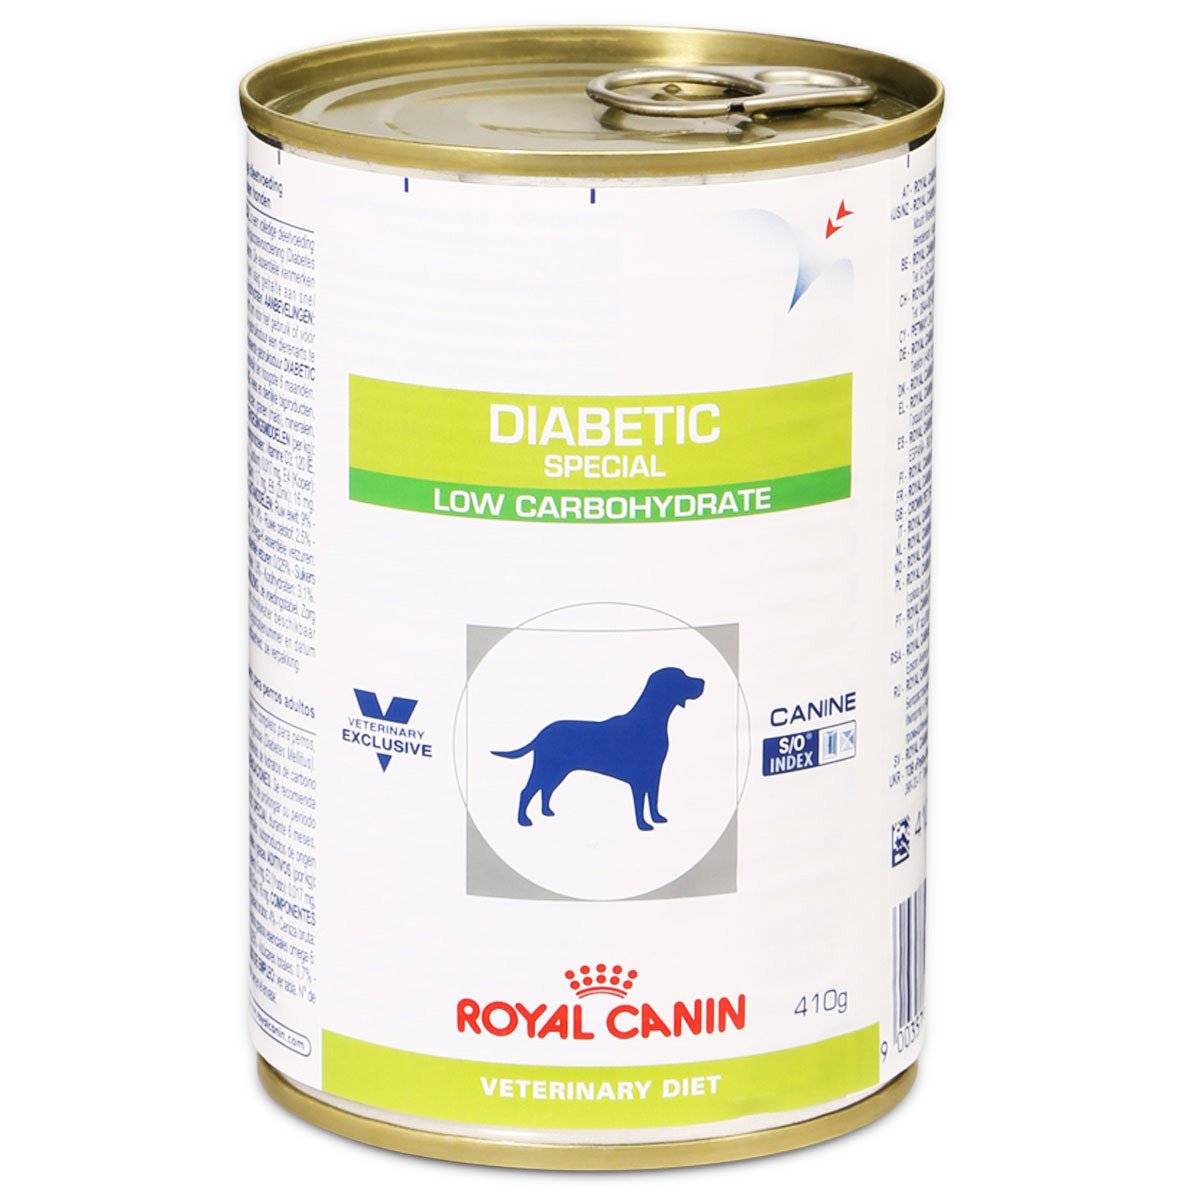 ROYAL CANIN Diabetic Special Low Carbohydrate 24x410g Canine ZooLand